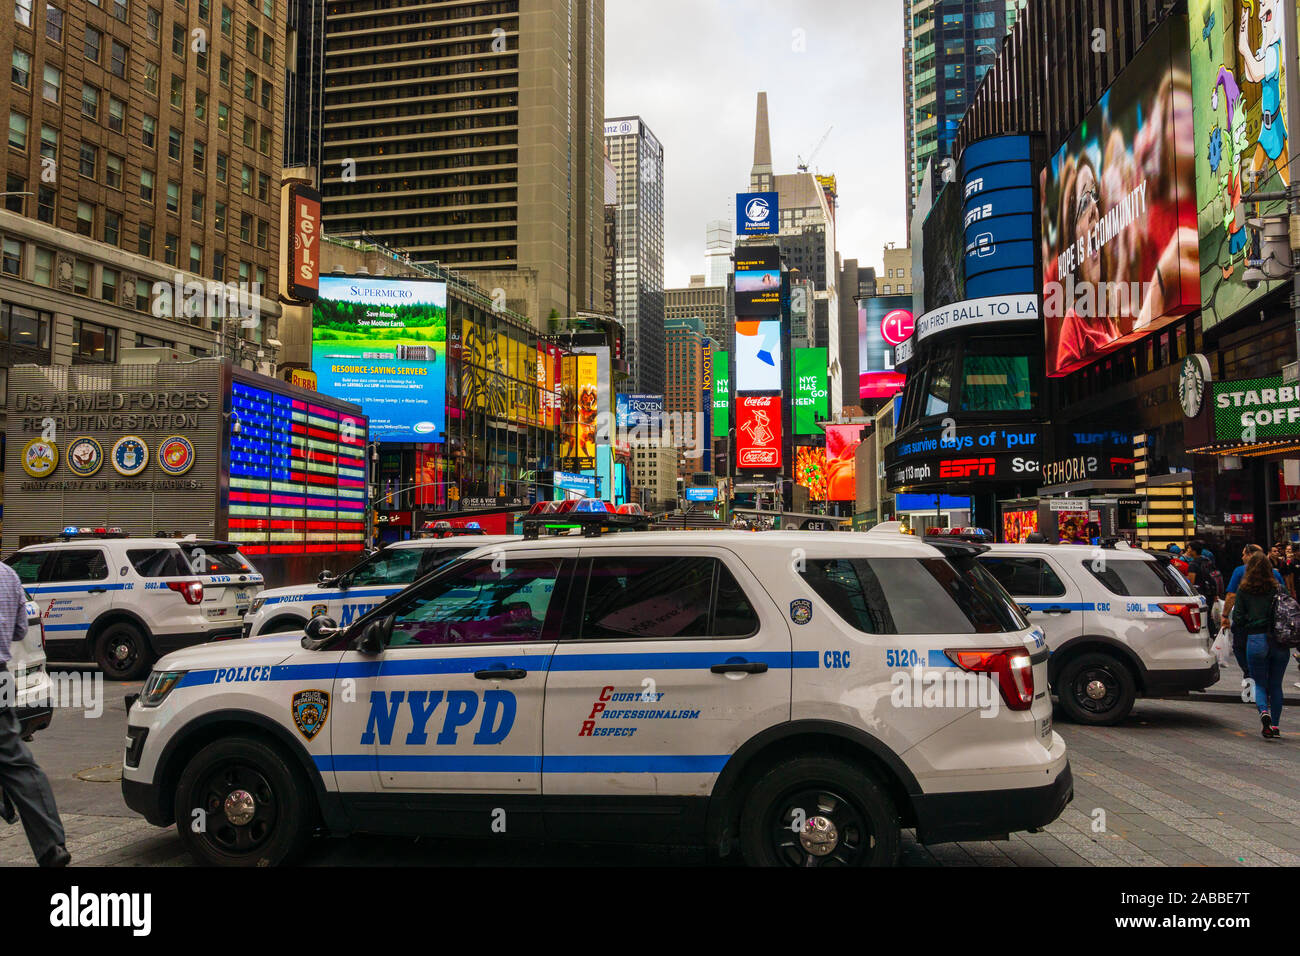 New York, USA - aug 20, 2018: New York City Police Department car in Time Square, New York City Stock Photo